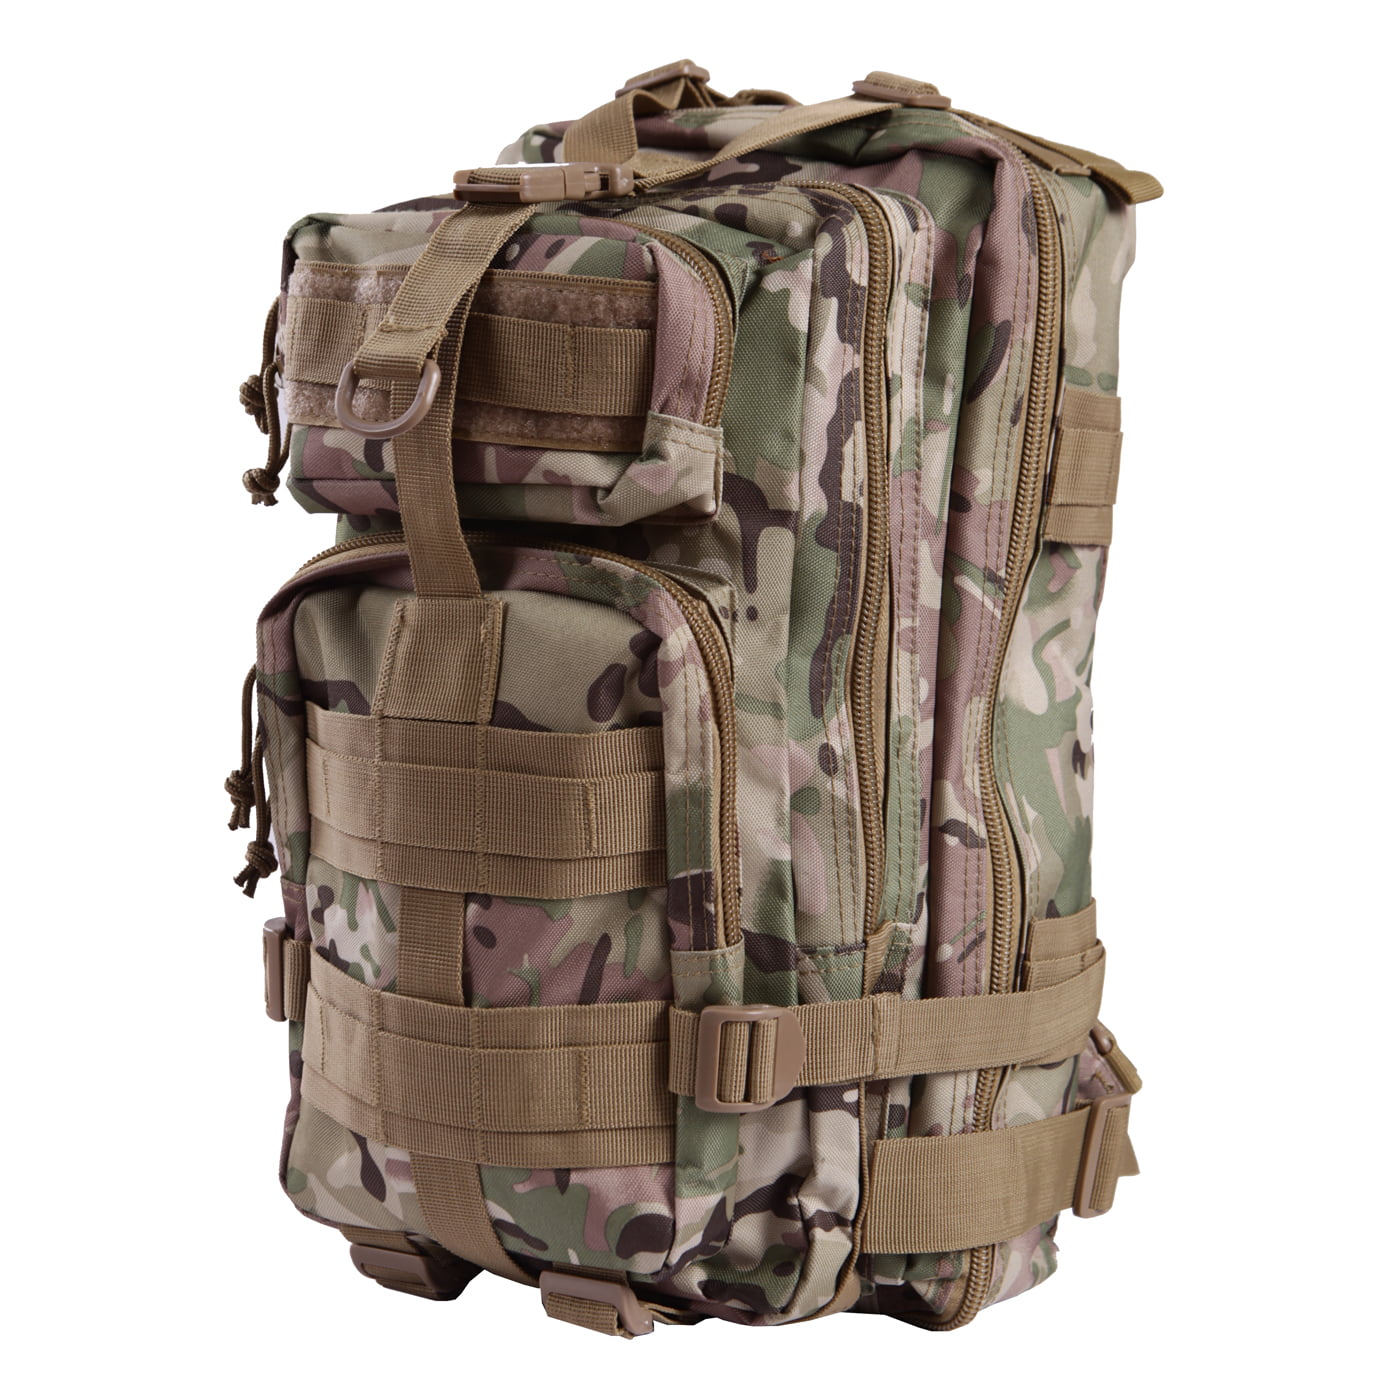 New Bulle UCP MOLLE Webbing Tactical Pack 20l Daypack Bug Out Bag 